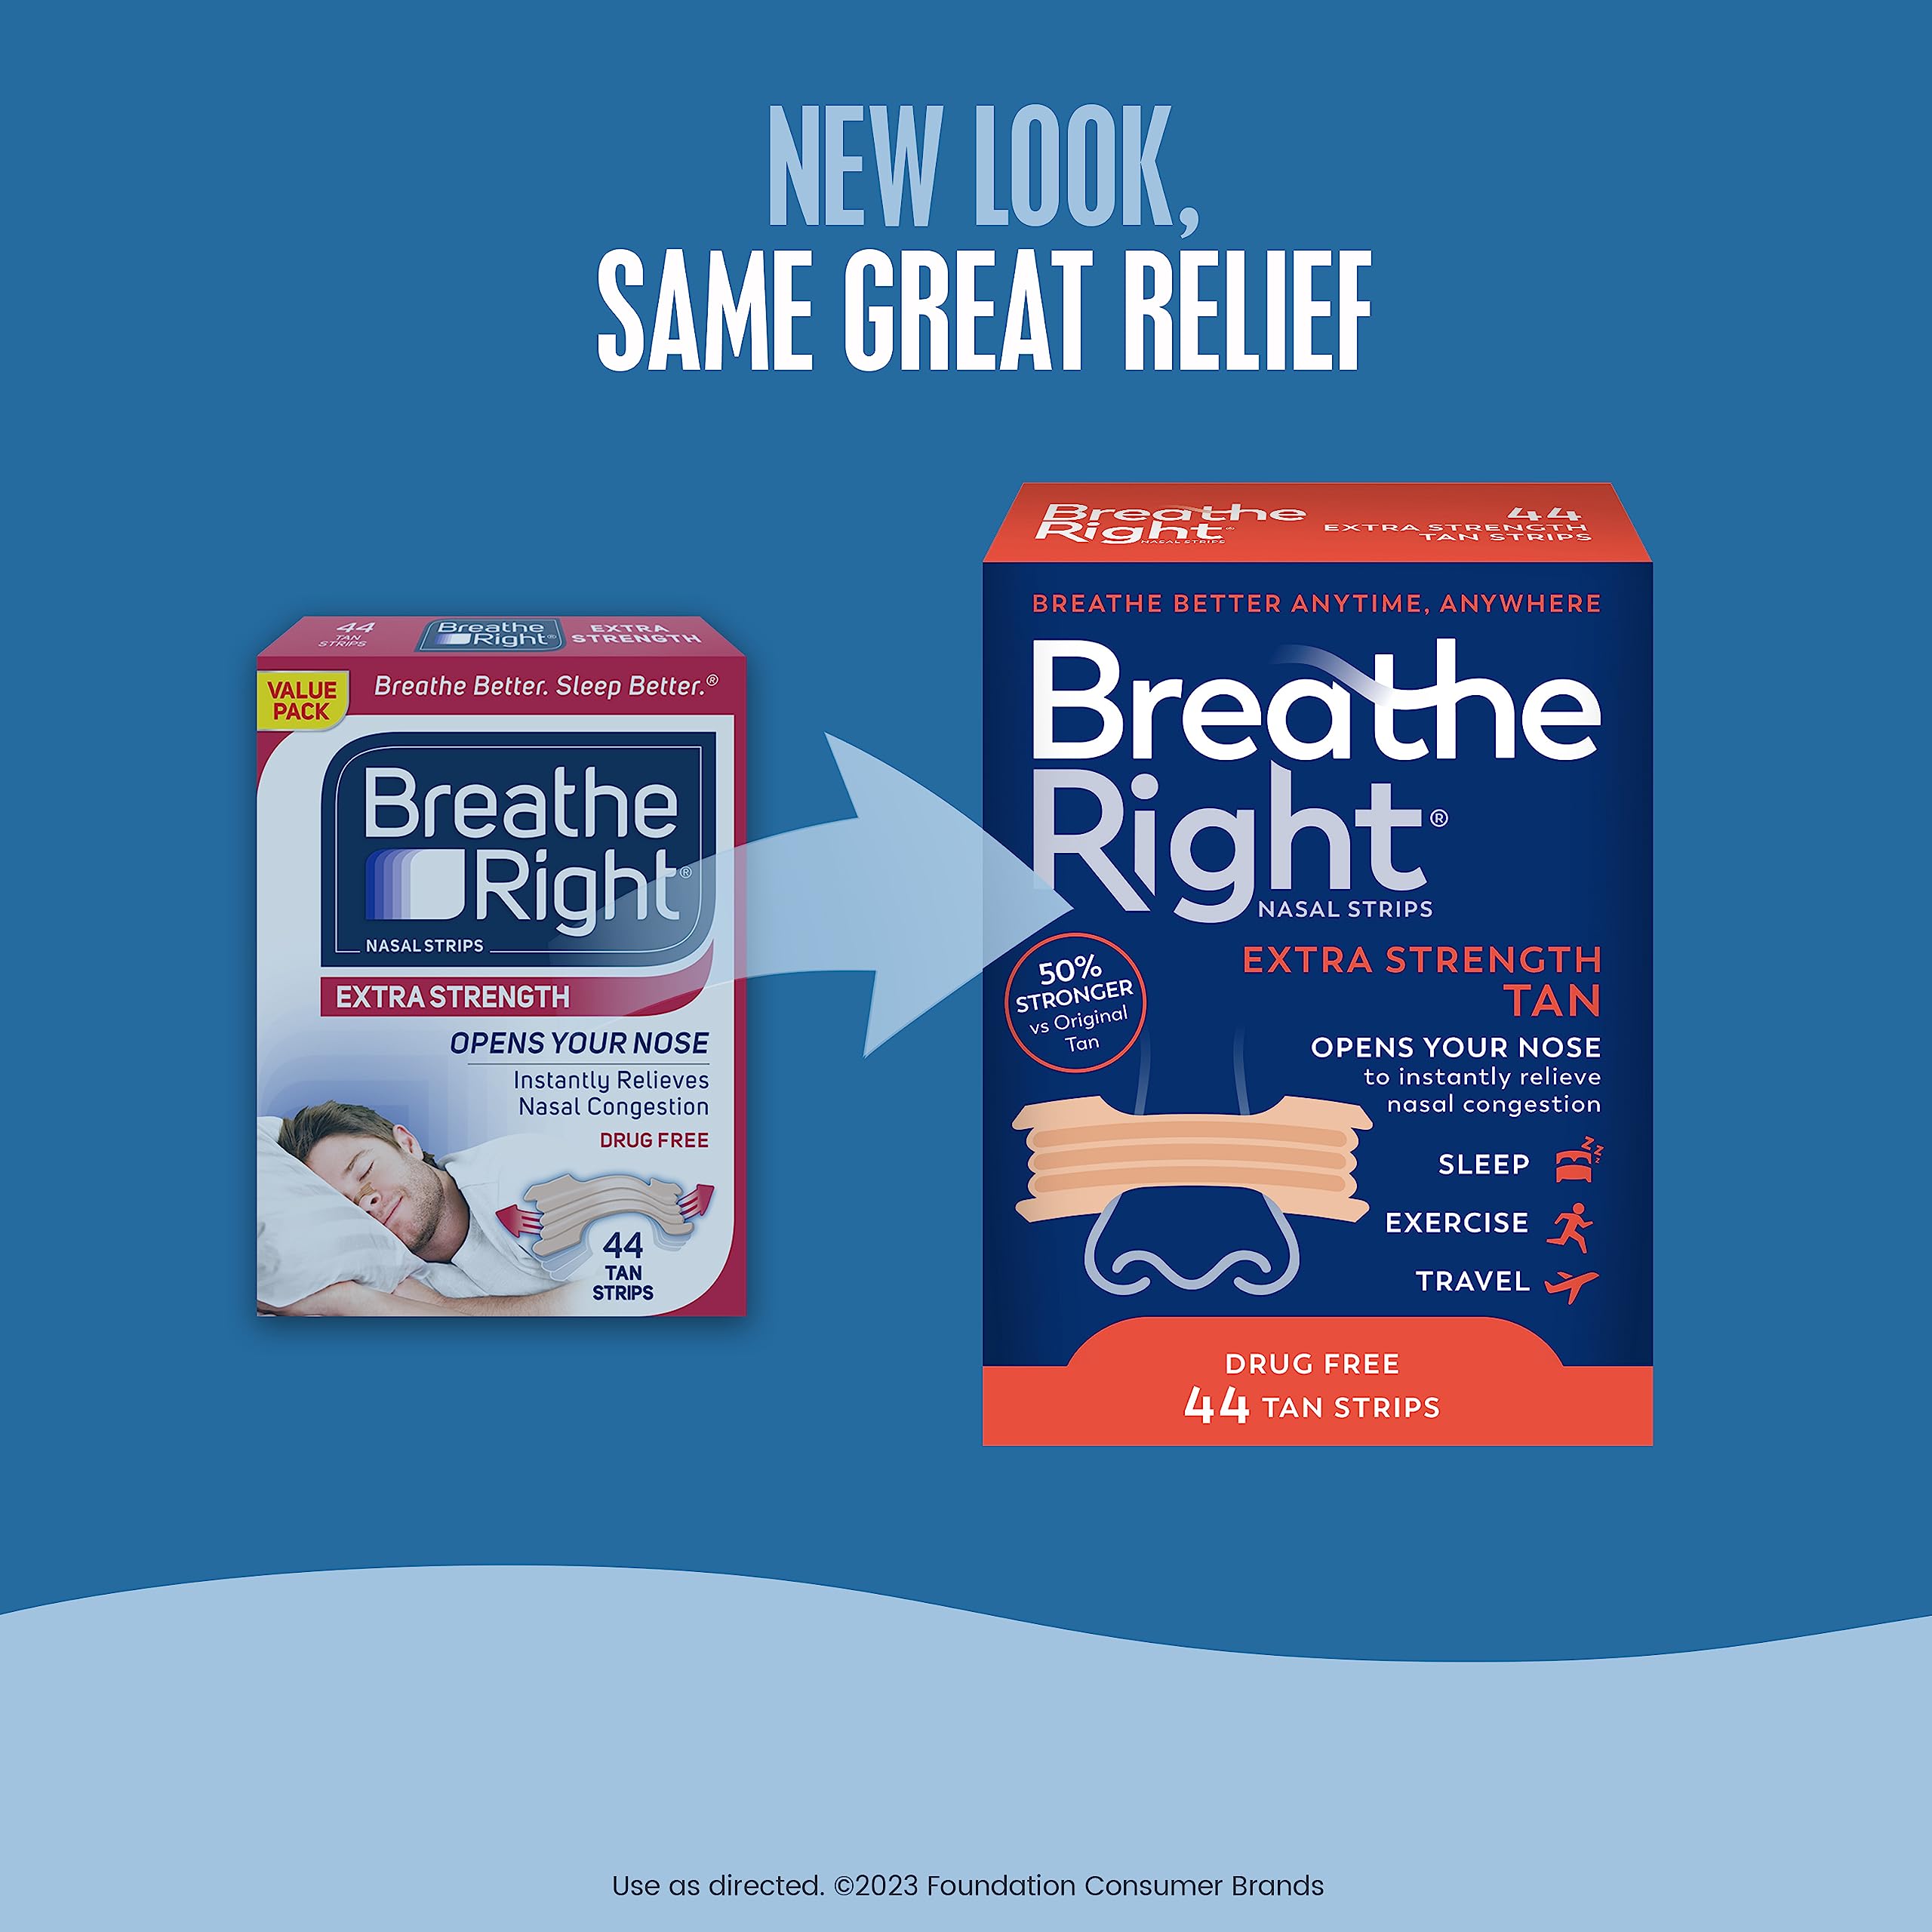 Breathe Right Nasal Strips, Extra Strength, Tan Nasal Strips, Help Stop Snoring, Drug-Free Snoring Solution & Instant Nasal Congestion Relief Caused by Colds & Allergies, 44ct (packaging my vary)